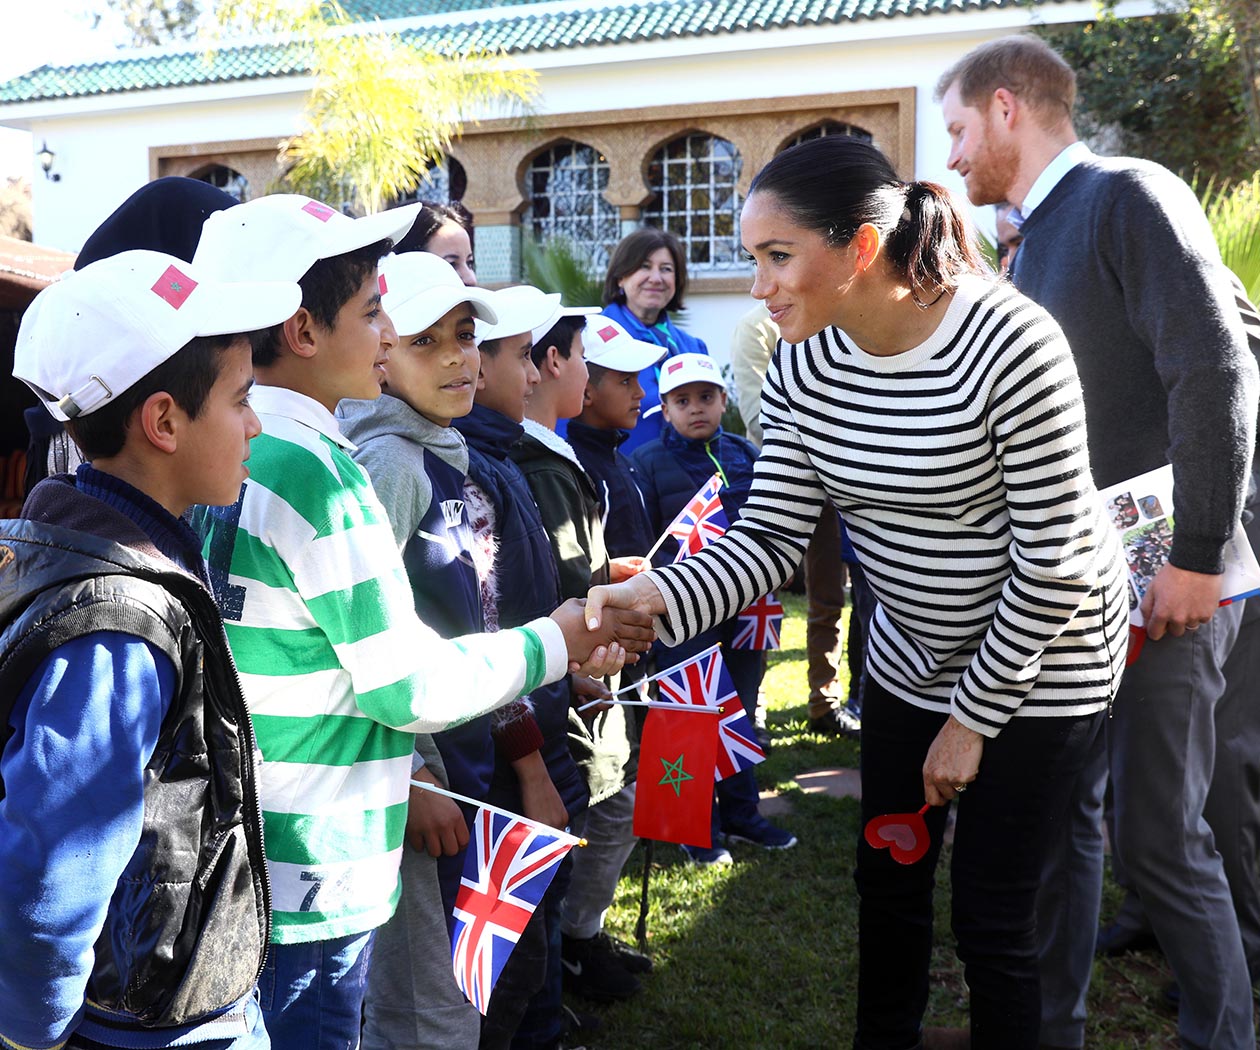 meghan markle and prince harry greet children in morocco